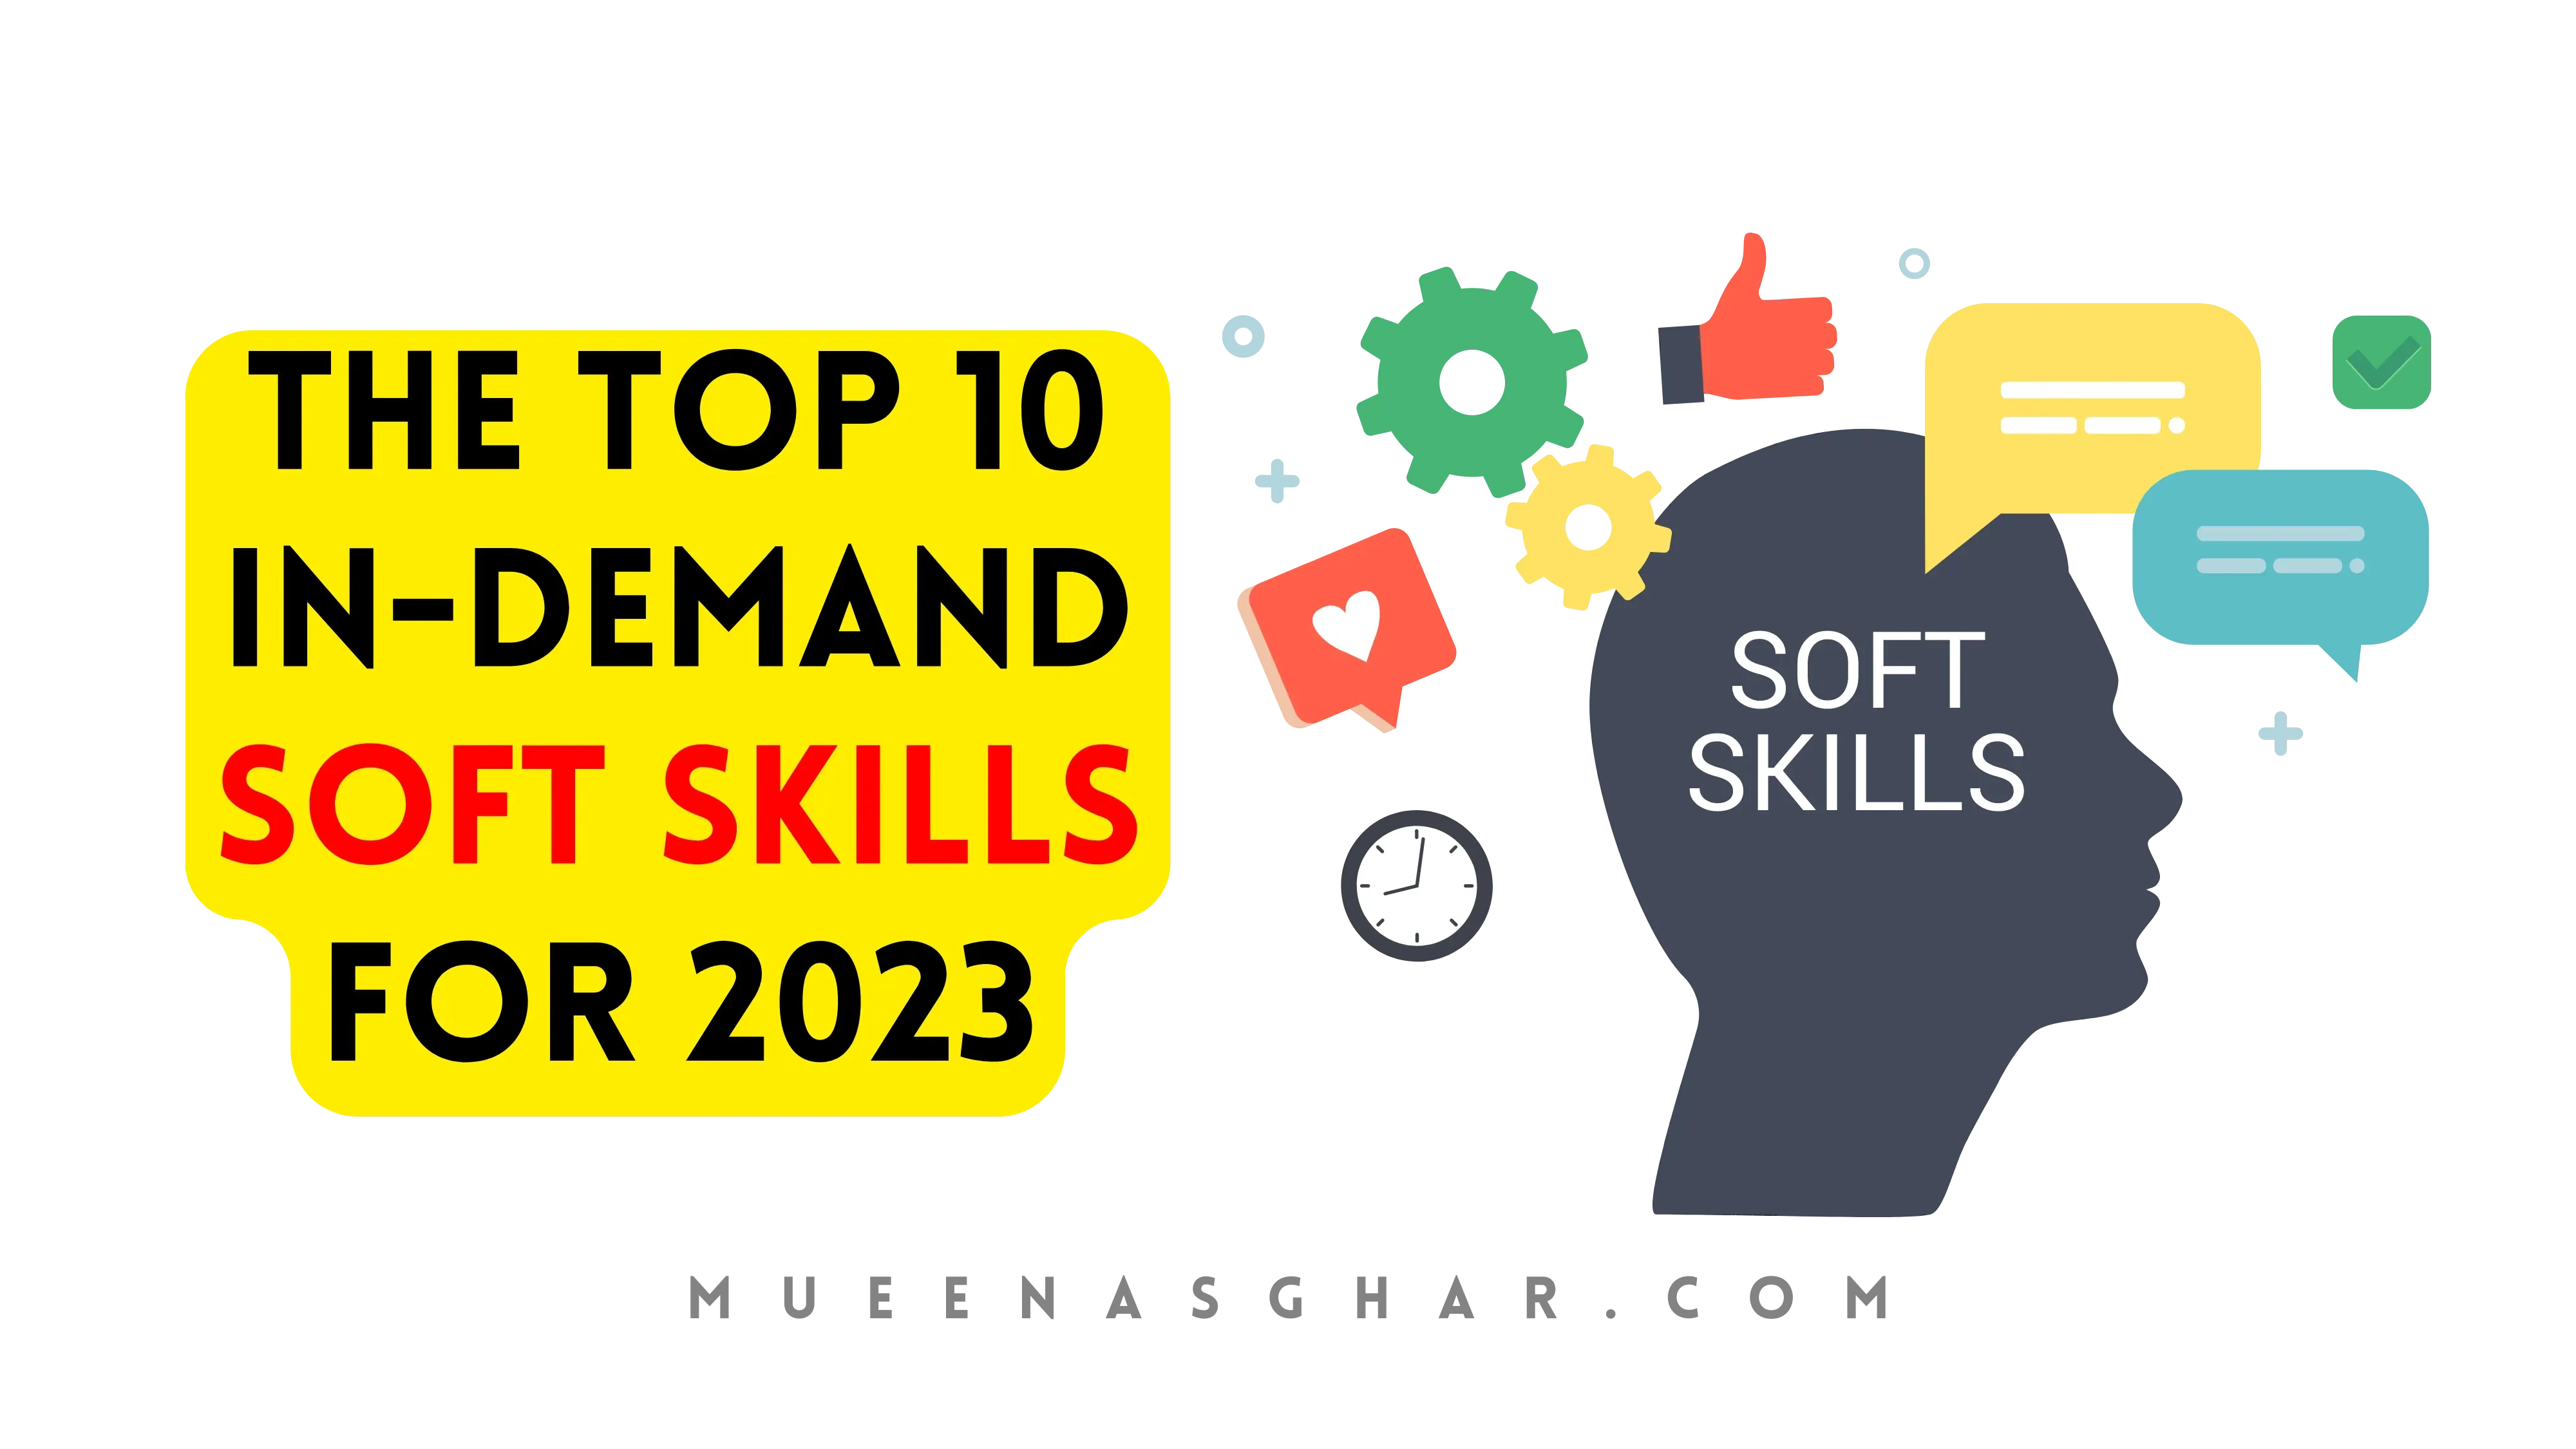 The Top 10 in-demand soft skills for 2023